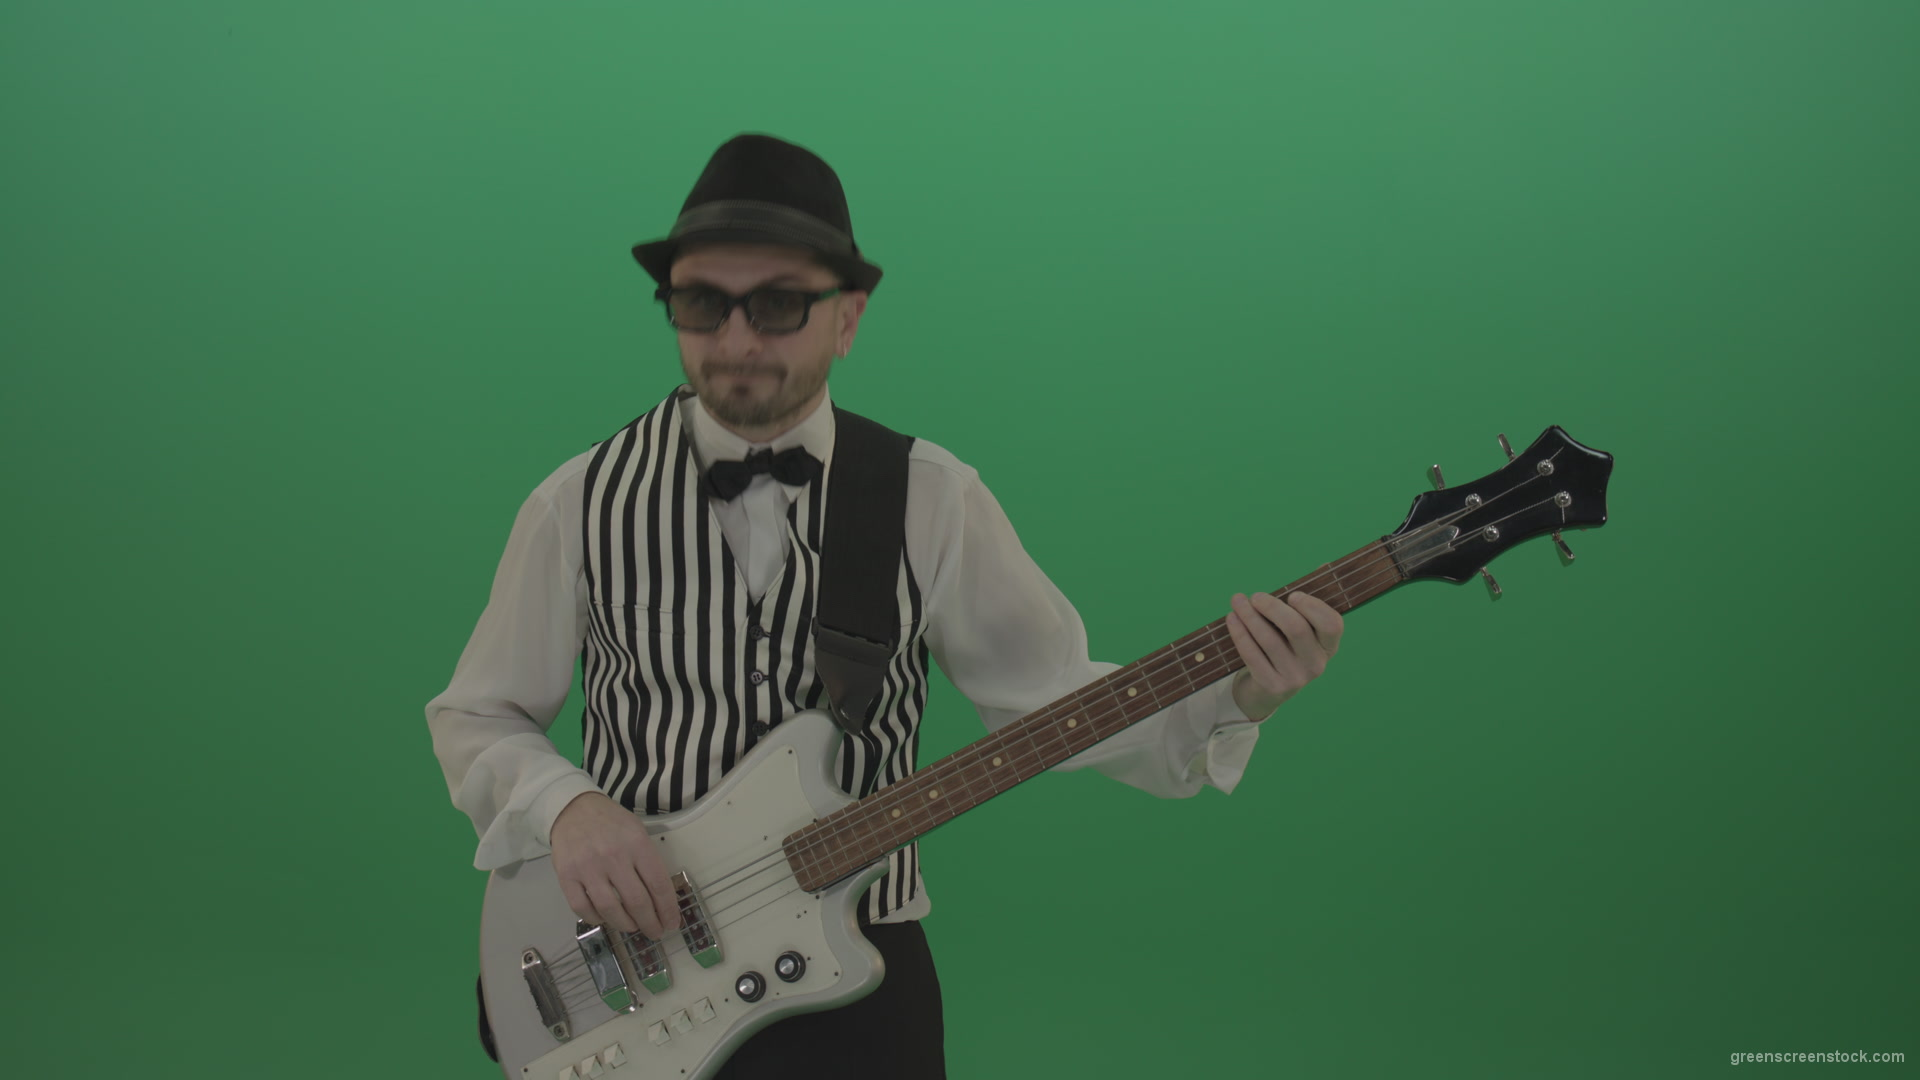 Guitar-player-browses-the-bass-guitar-playing-solo-and-charismatically-shows-facial-expressions_005 Green Screen Stock